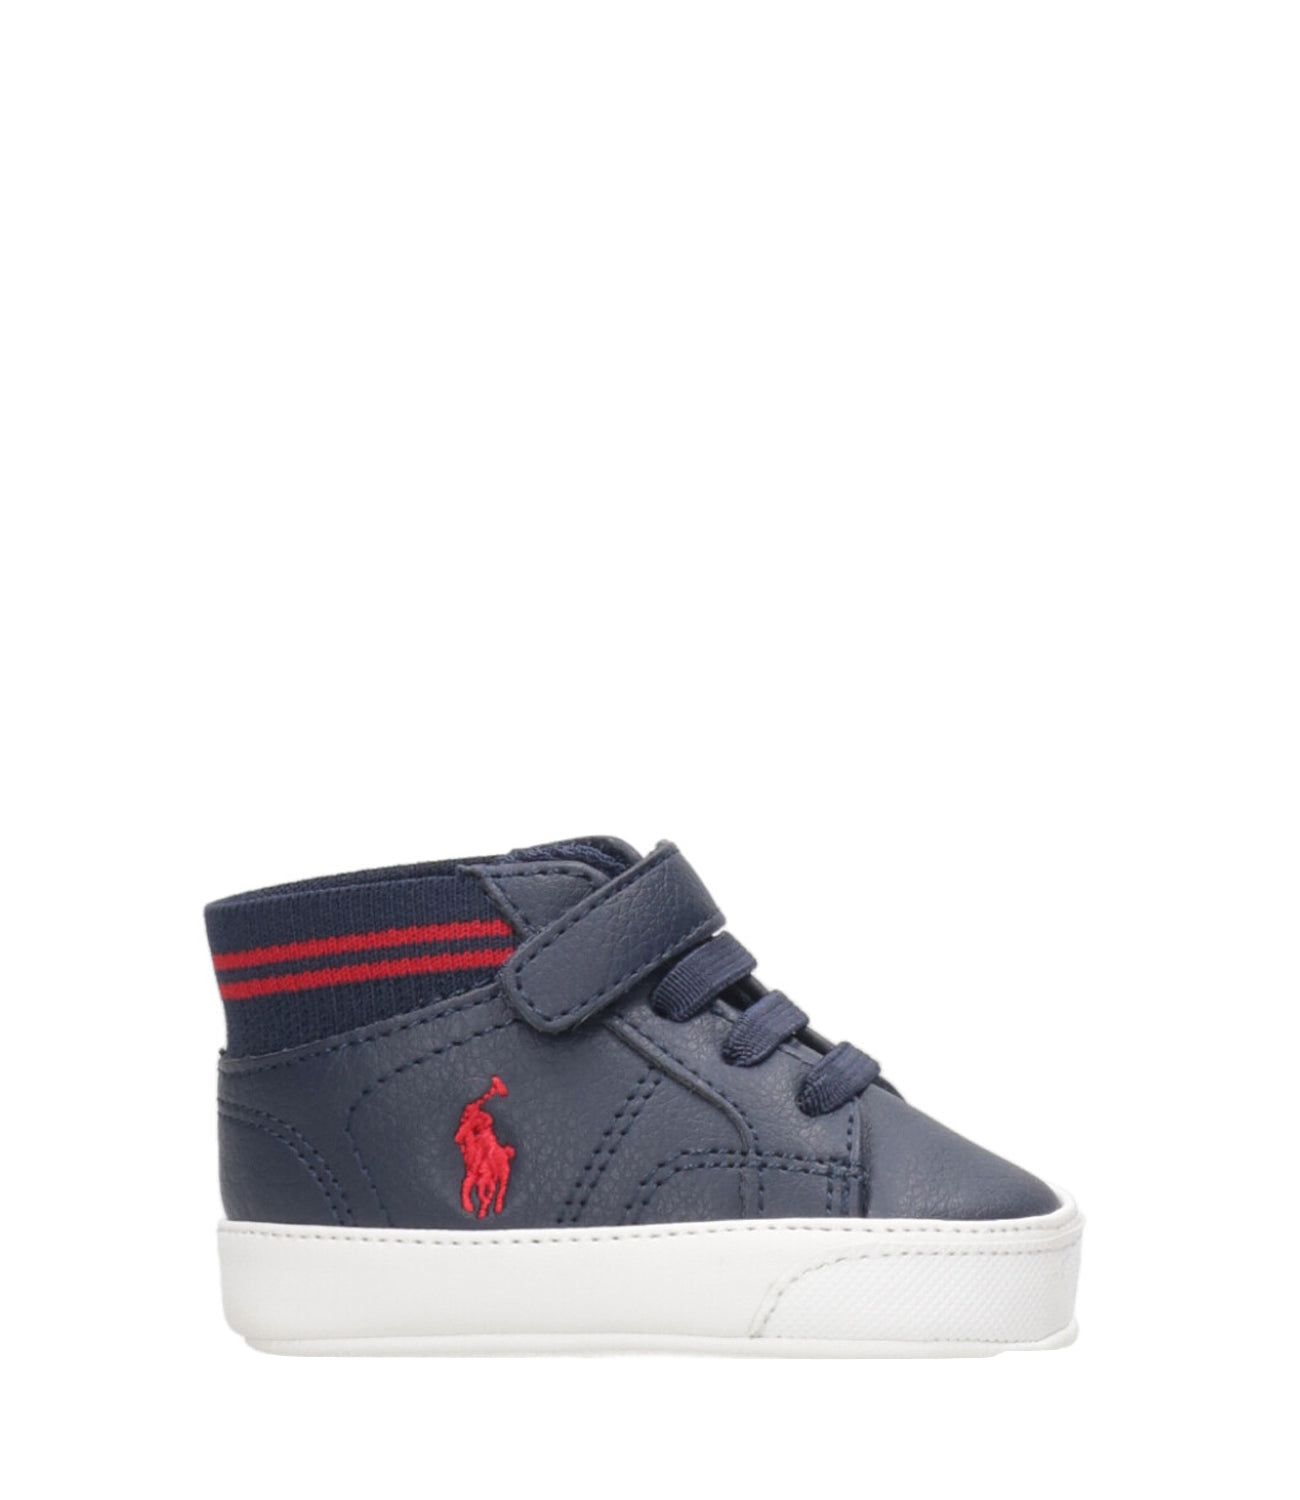 Ralph Lauren Childrenswear | High Sneakers Theron Boot Navy Blue and Red